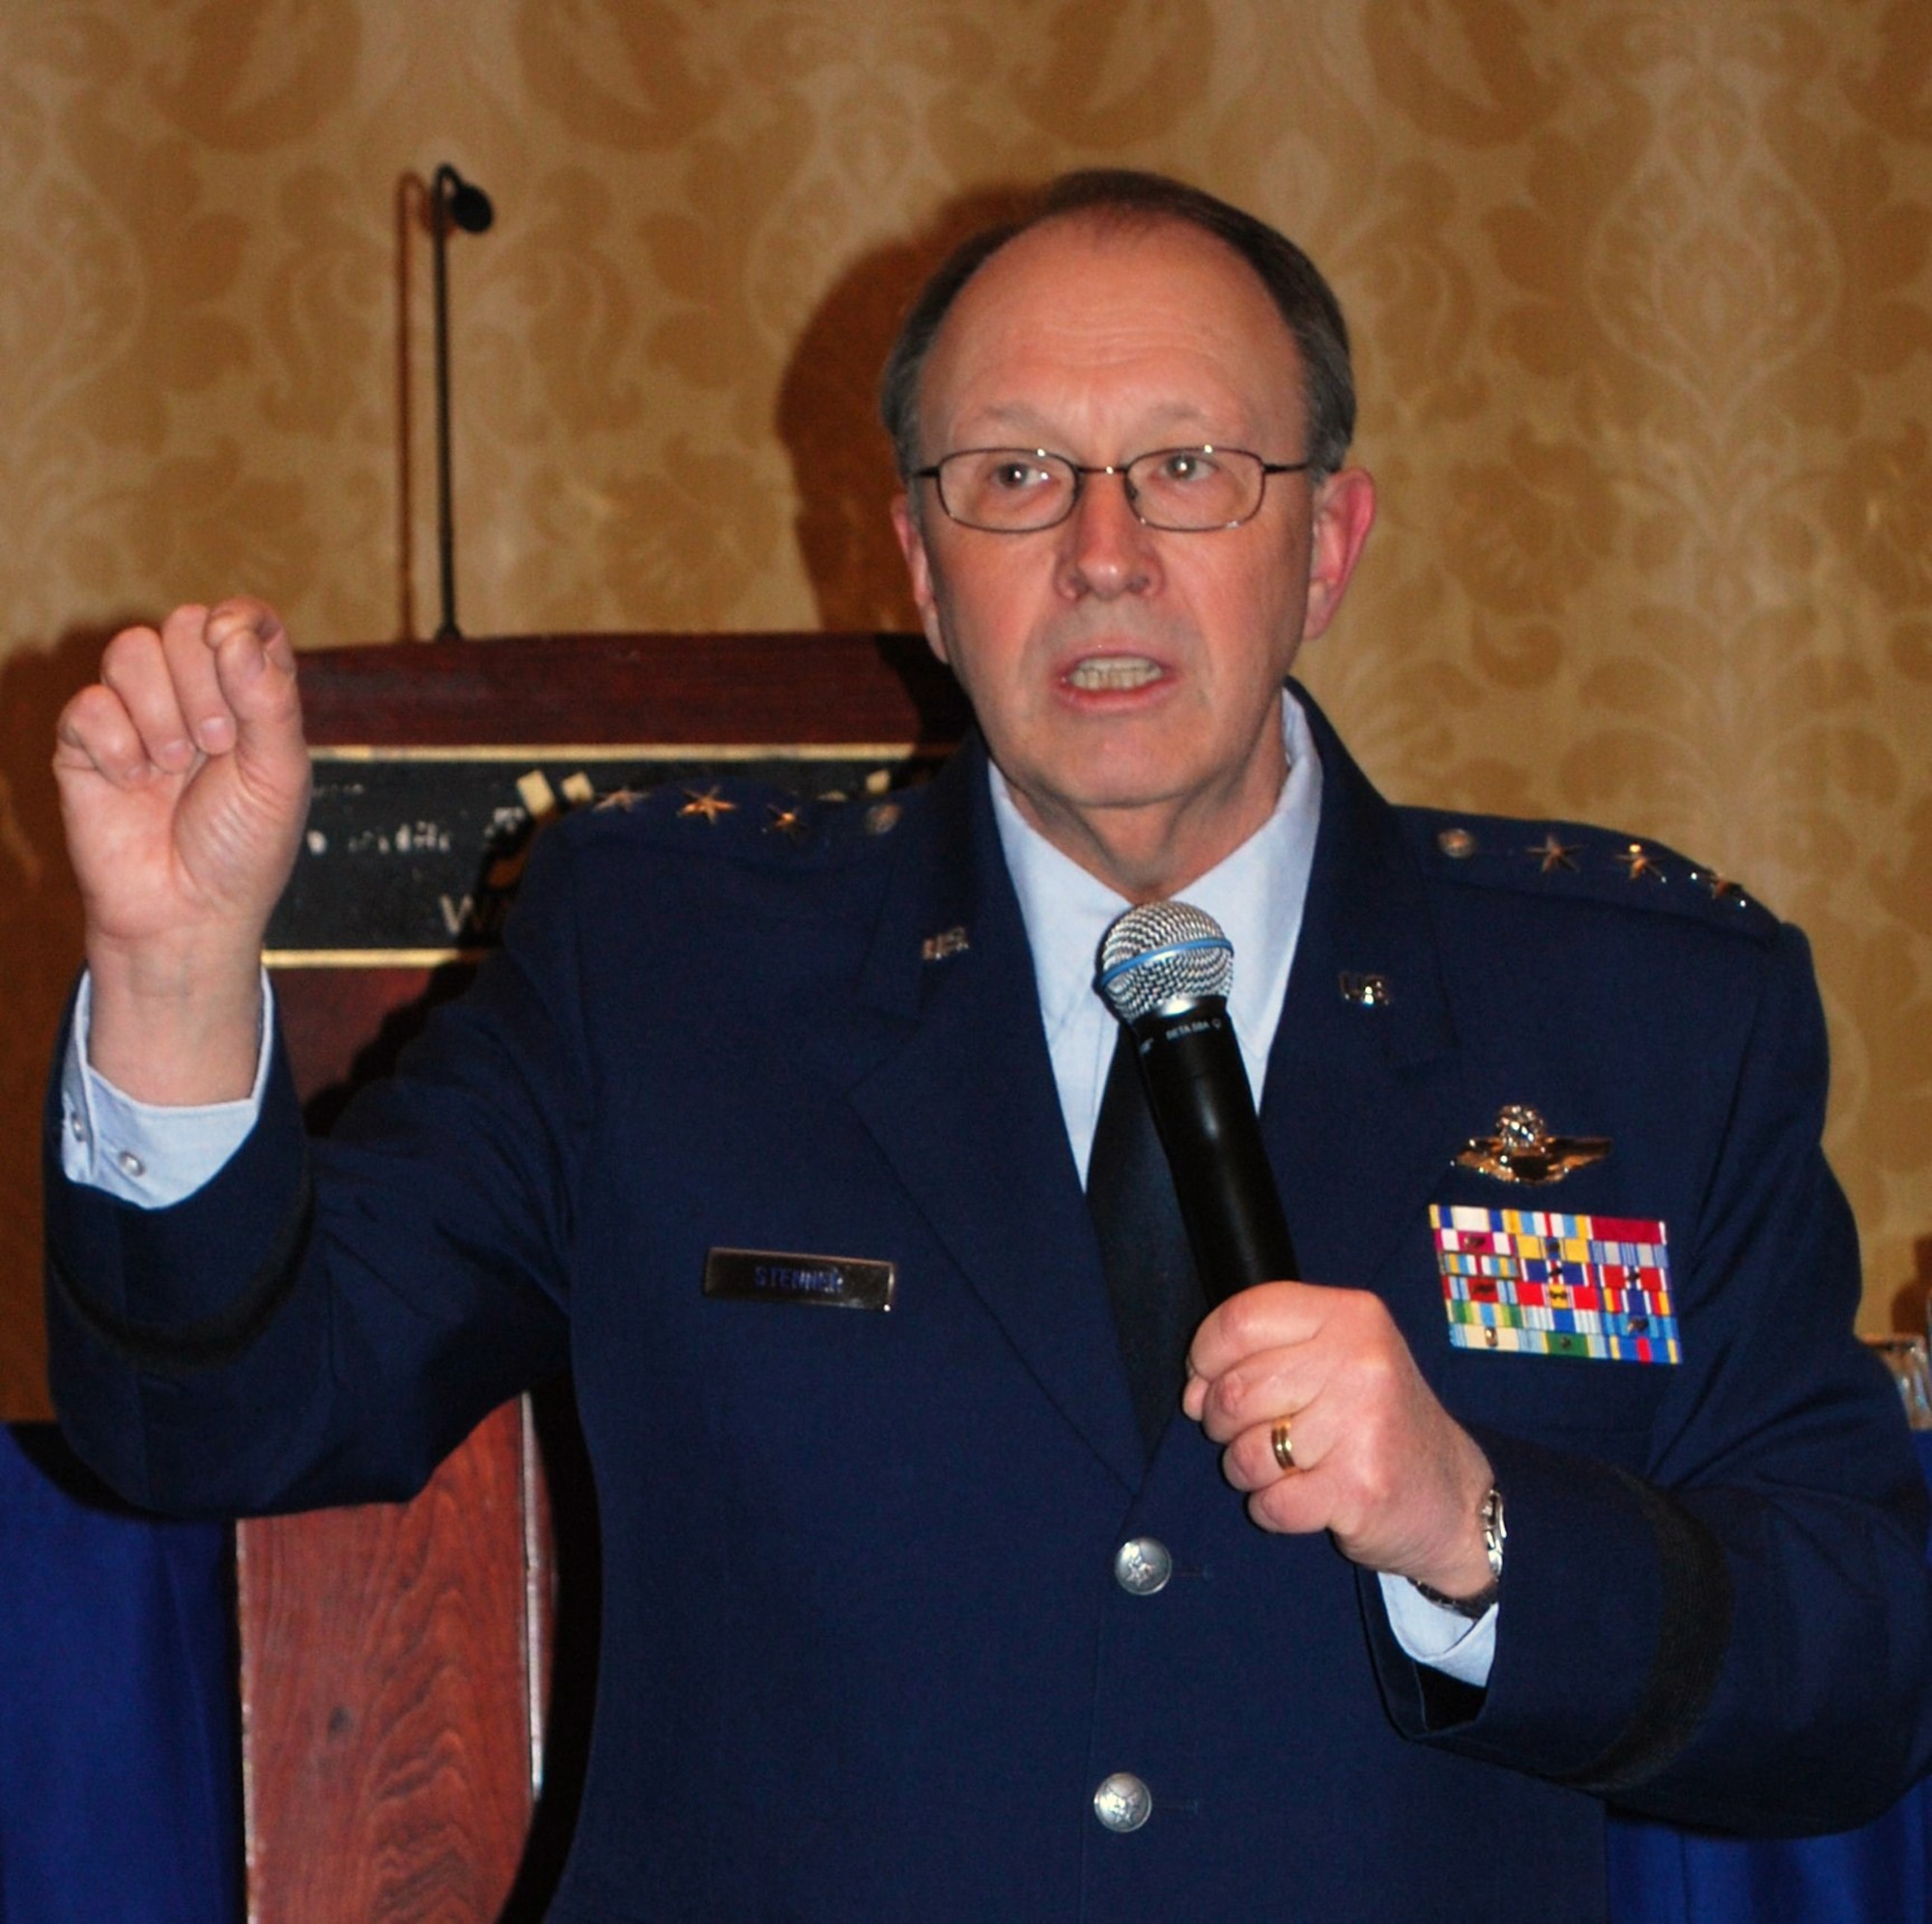 Lt. Gen. Charles E. Stenner Jr., addresses the crowd at the ROA National Security Symposium in Washington, D.C., on Feb. 1, 2011. General Stenner, chief of the Air Force Reserve and commander of Air Force Reserve Command, discussed initiatives to streamline business practices for daily operations as well as strategic surges. (U.S. Air Force photo/Col. Bob Thompson)